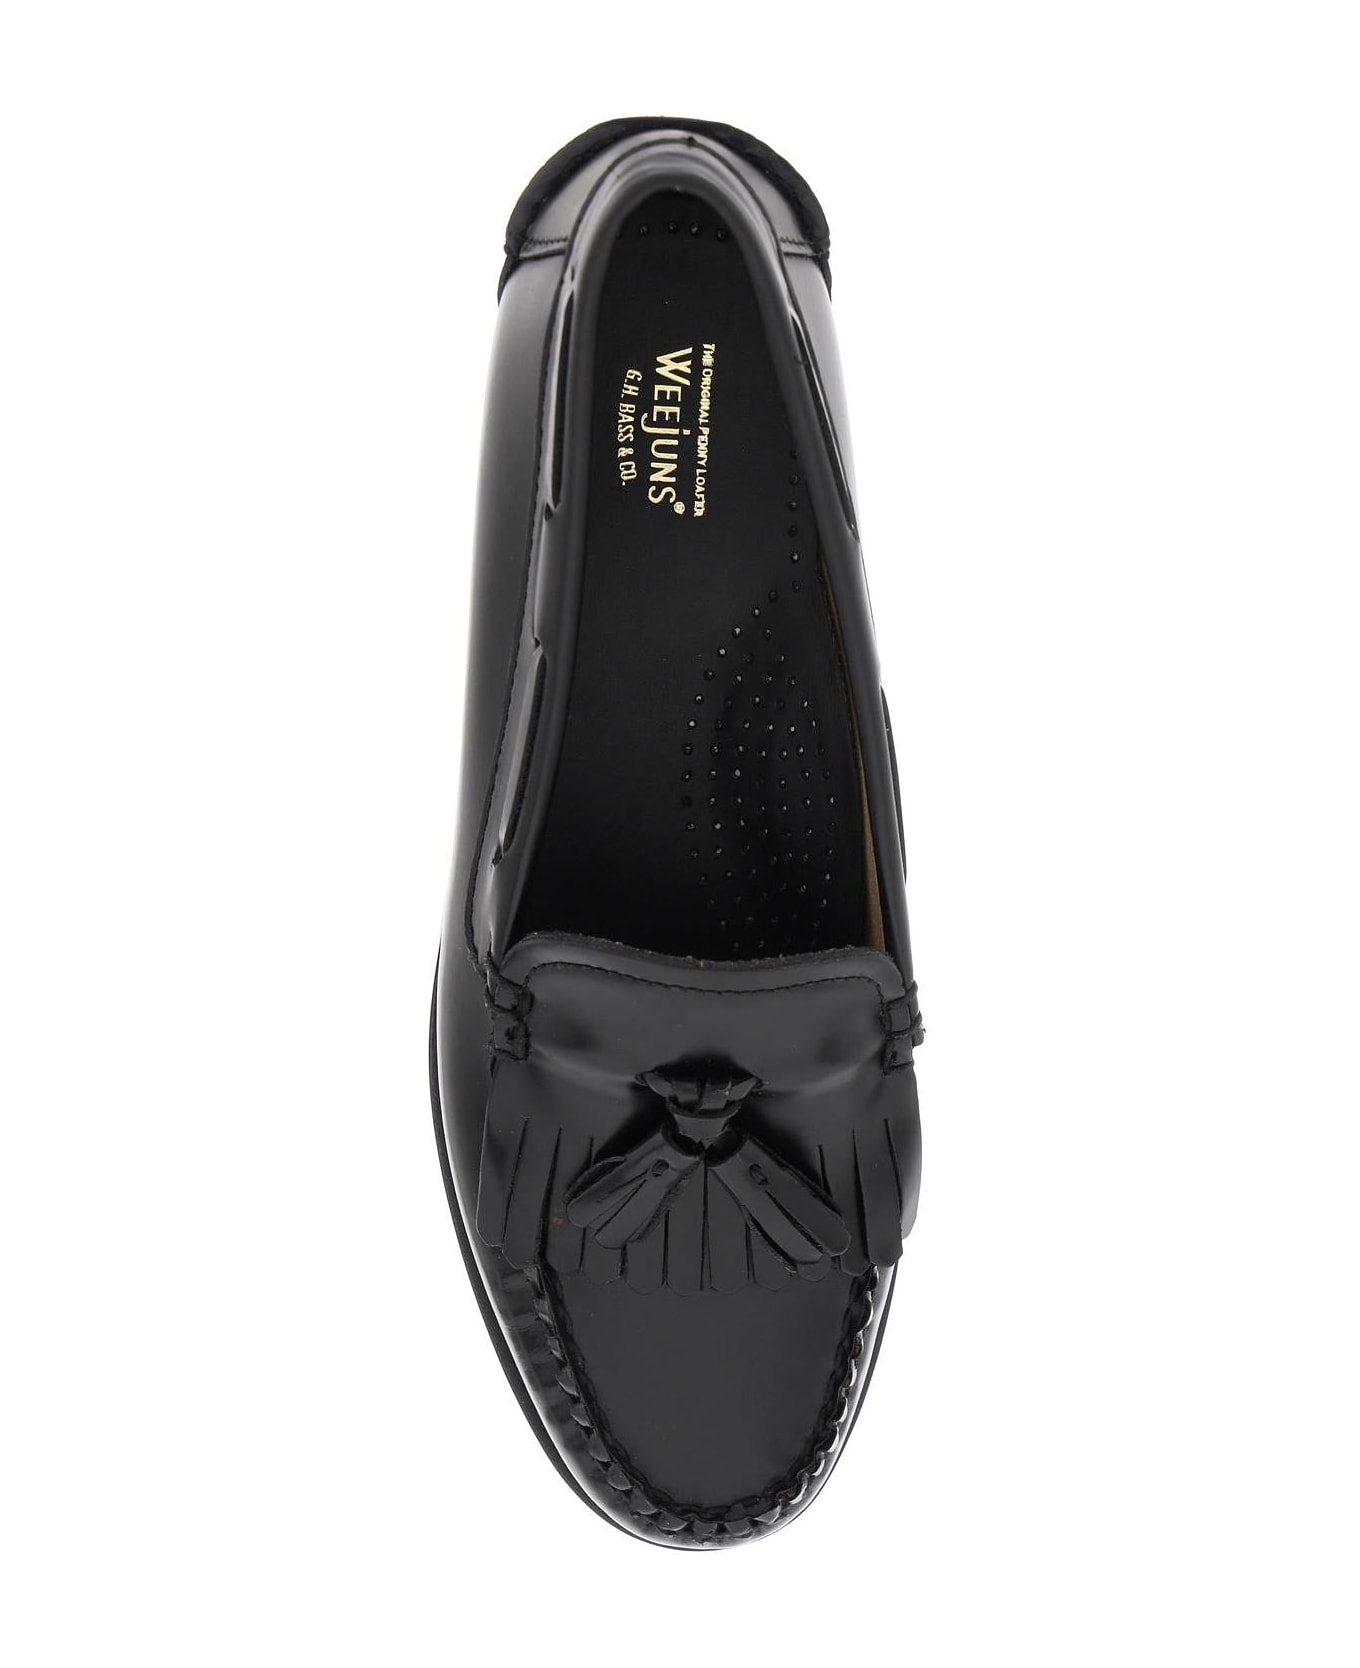 G.H.Bass & Co. Esther Kiltie Weejuns Loafers In Brushed Leather - BLACK (Black) フラットシューズ